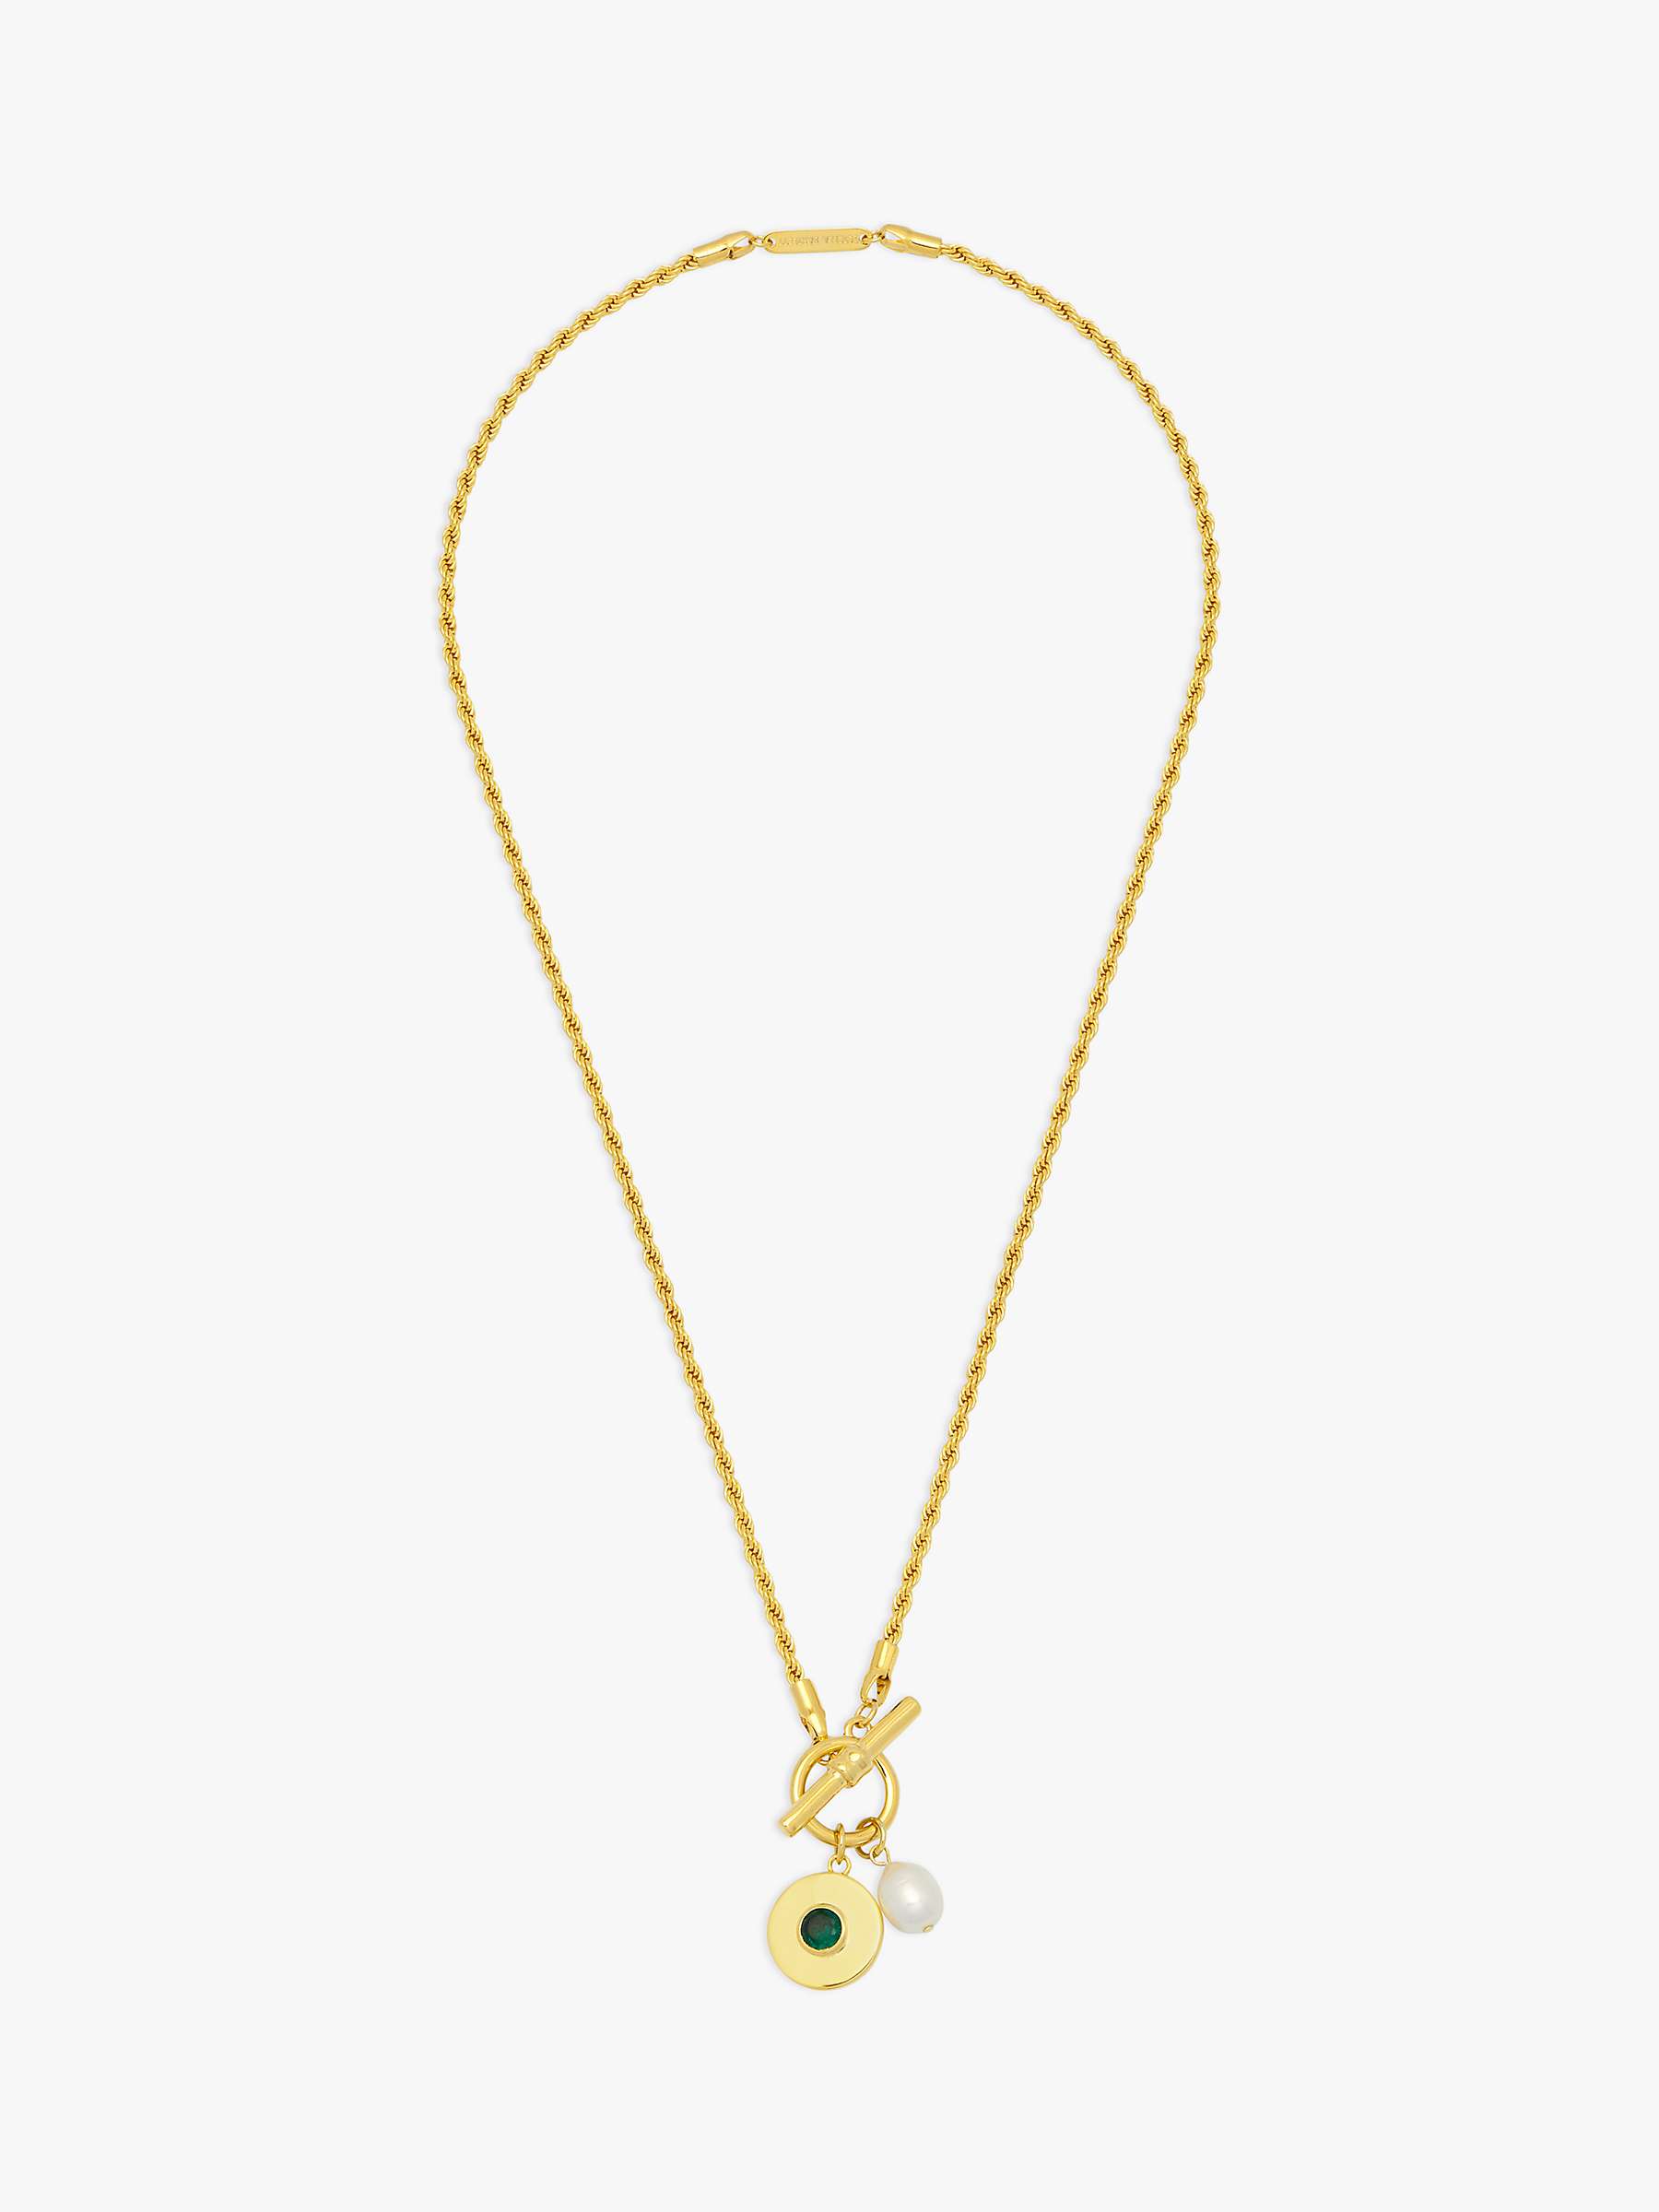 Buy Estella Bartlett Green Onyx & Pearl Rope T-Bar Necklace, Gold Online at johnlewis.com